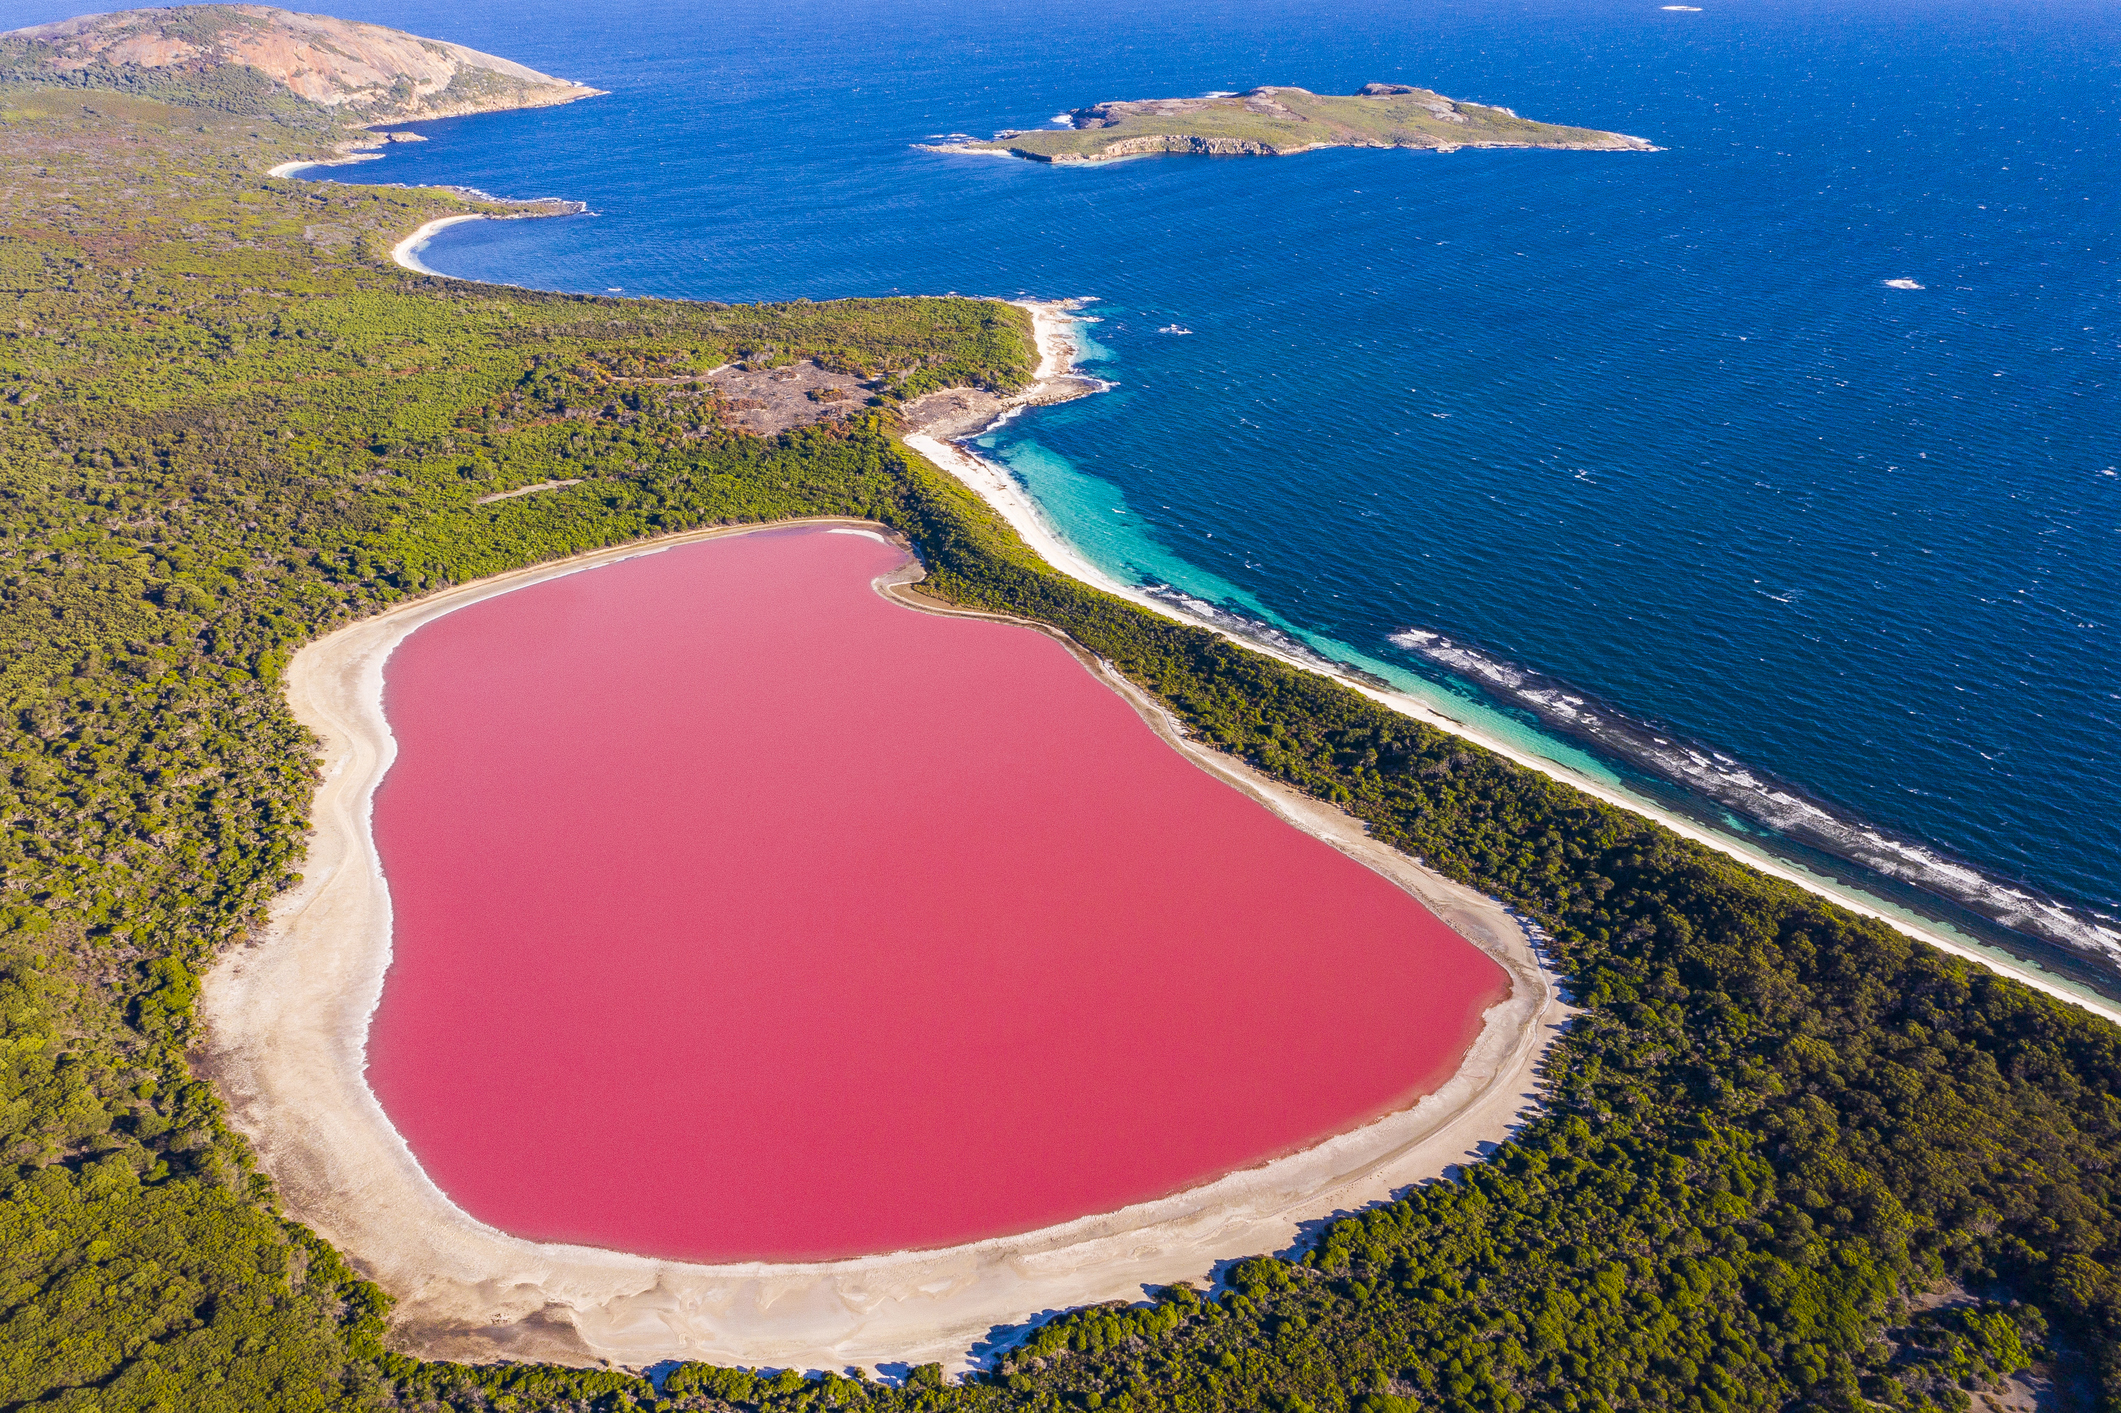 Aerial view of Lake Hillier, notable for its distinct pink color, surrounded by greenery and blue waters